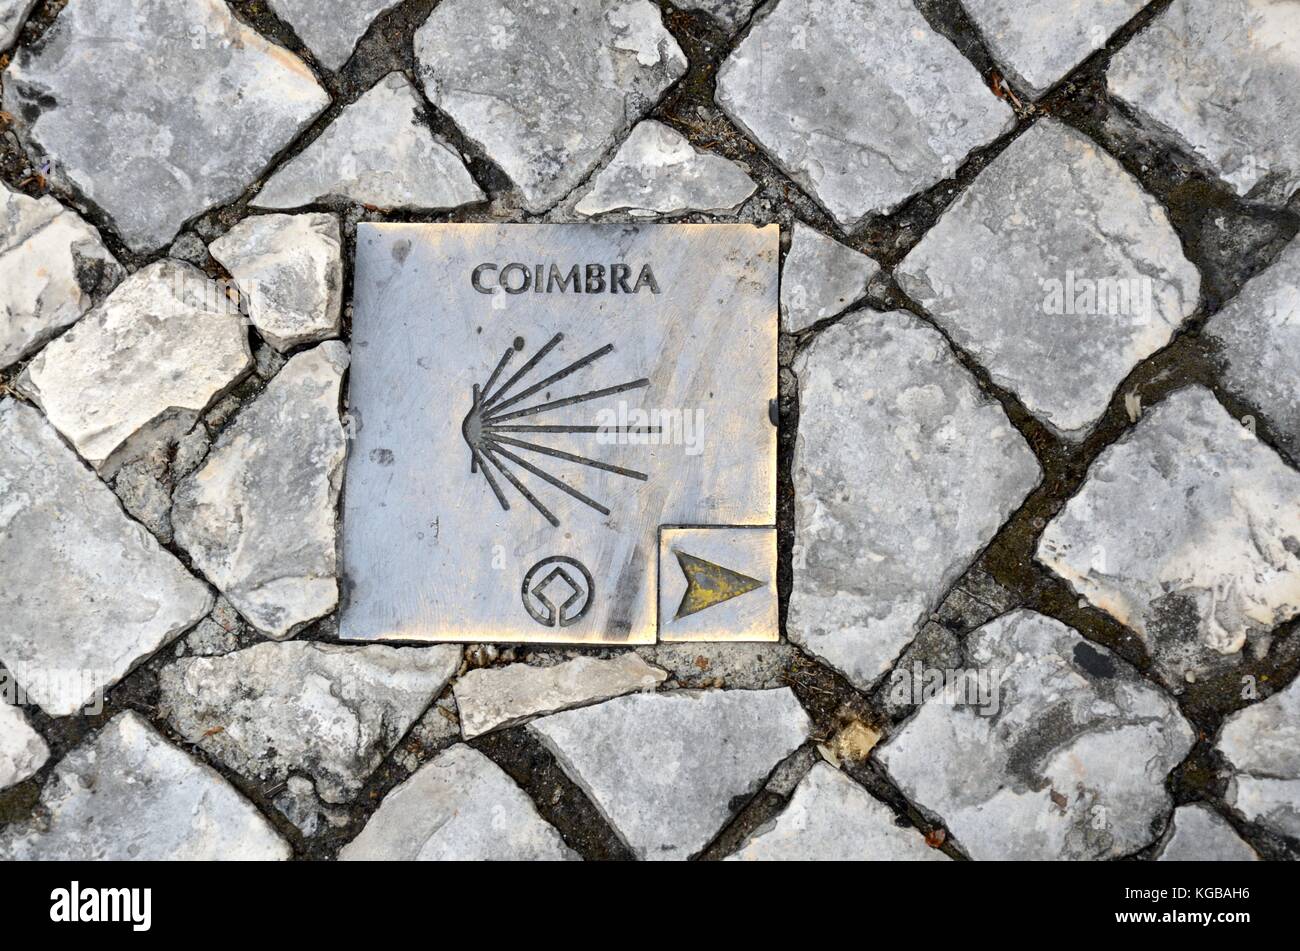 Plaque set in a cobbled street in Coimbra  showing the way path route to to The Camino Portuguese which spans from lLisbon to Sandiego Portugal Stock Photo